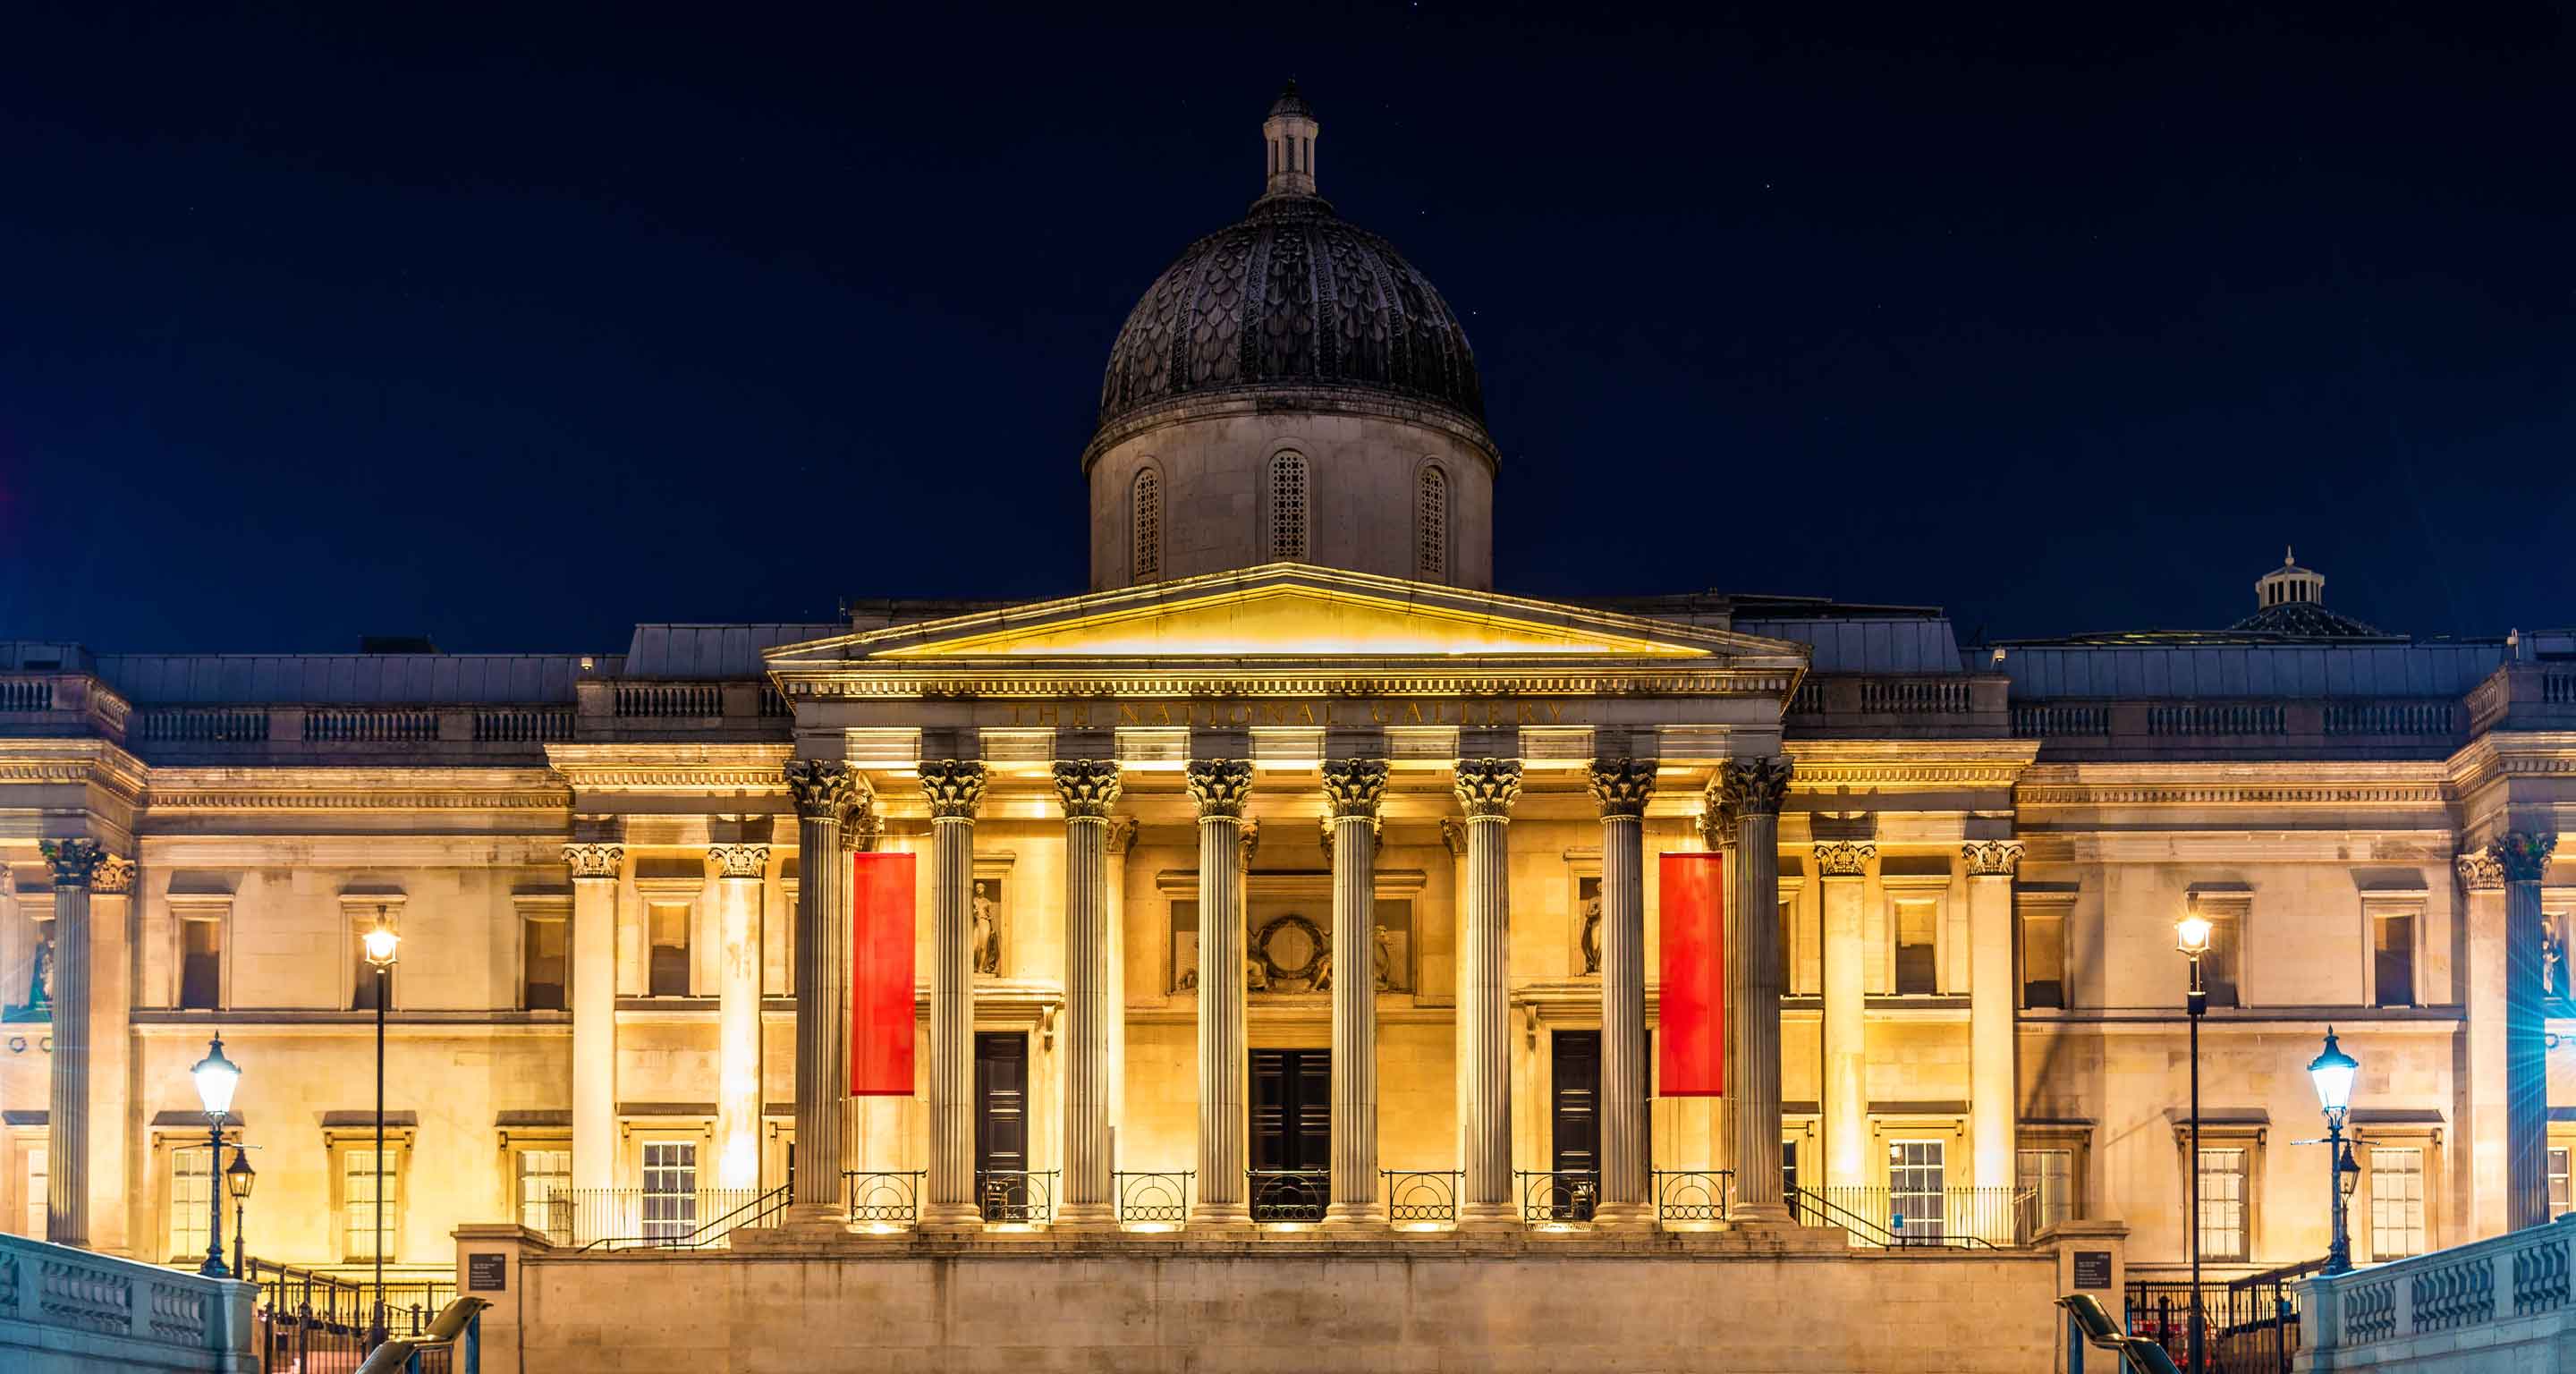 Facade of the National Gallery in London.